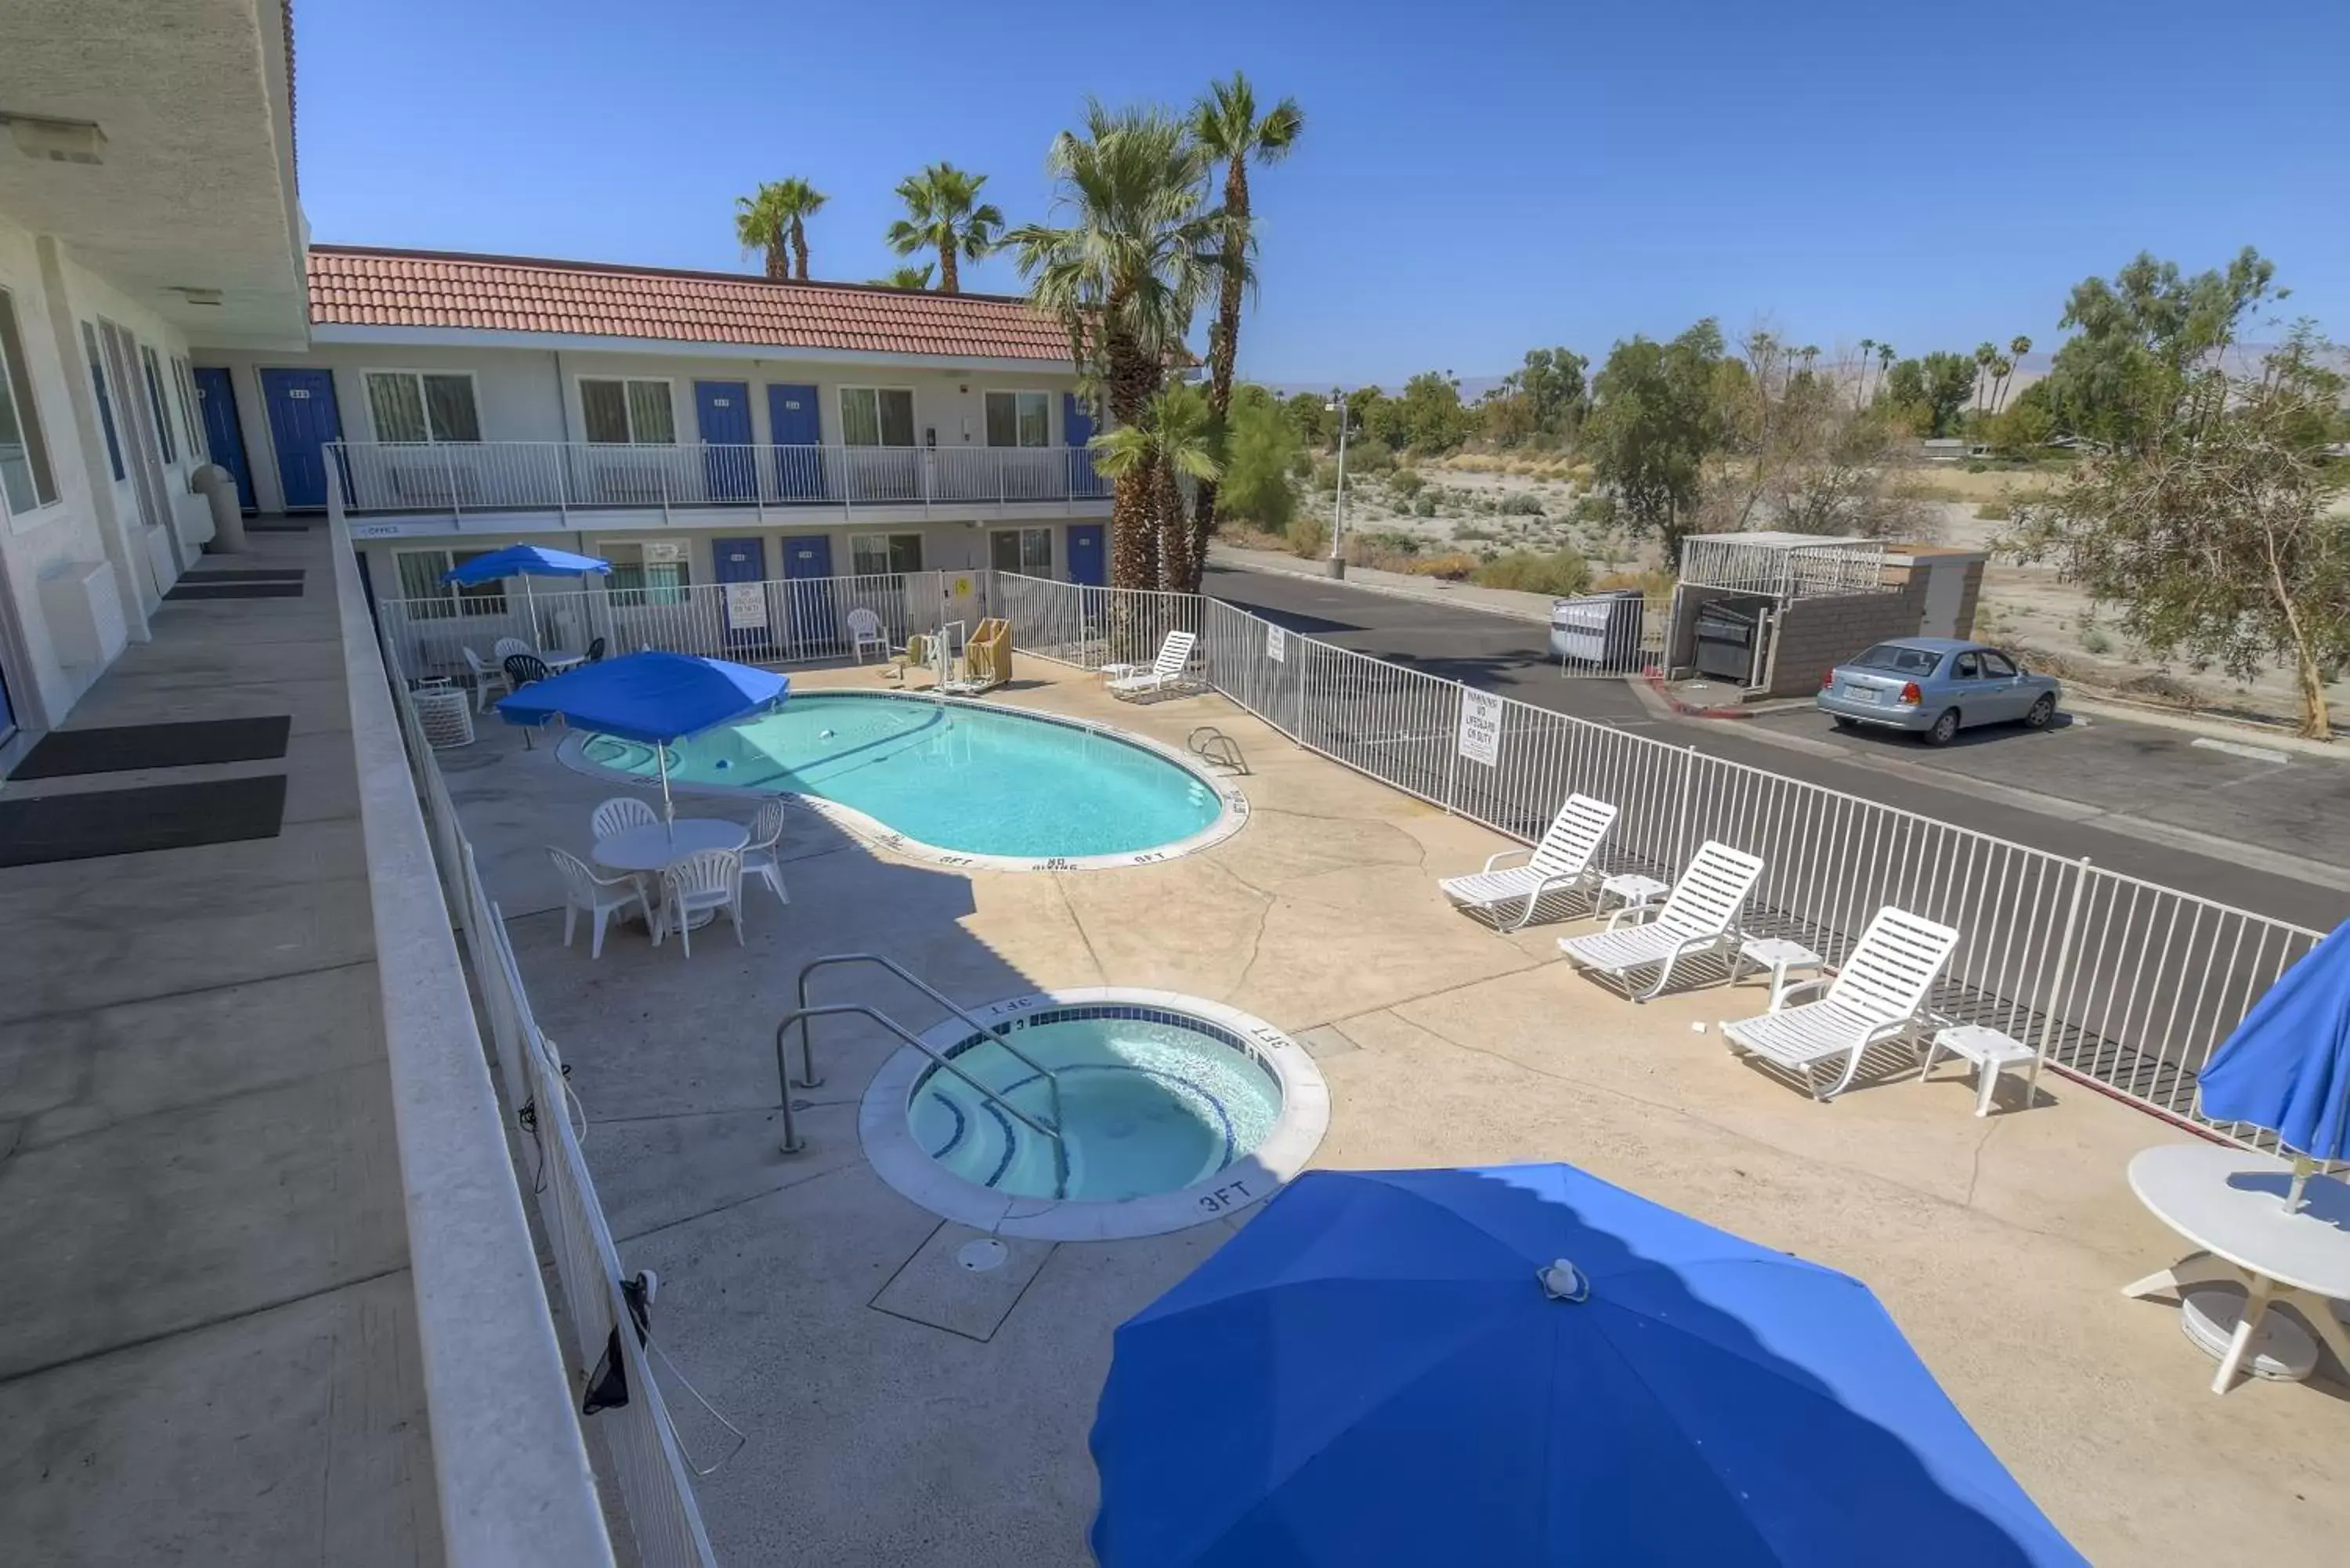 Bird's eye view, Pool View in Motel 6-Rancho Mirage, CA - Palm Springs